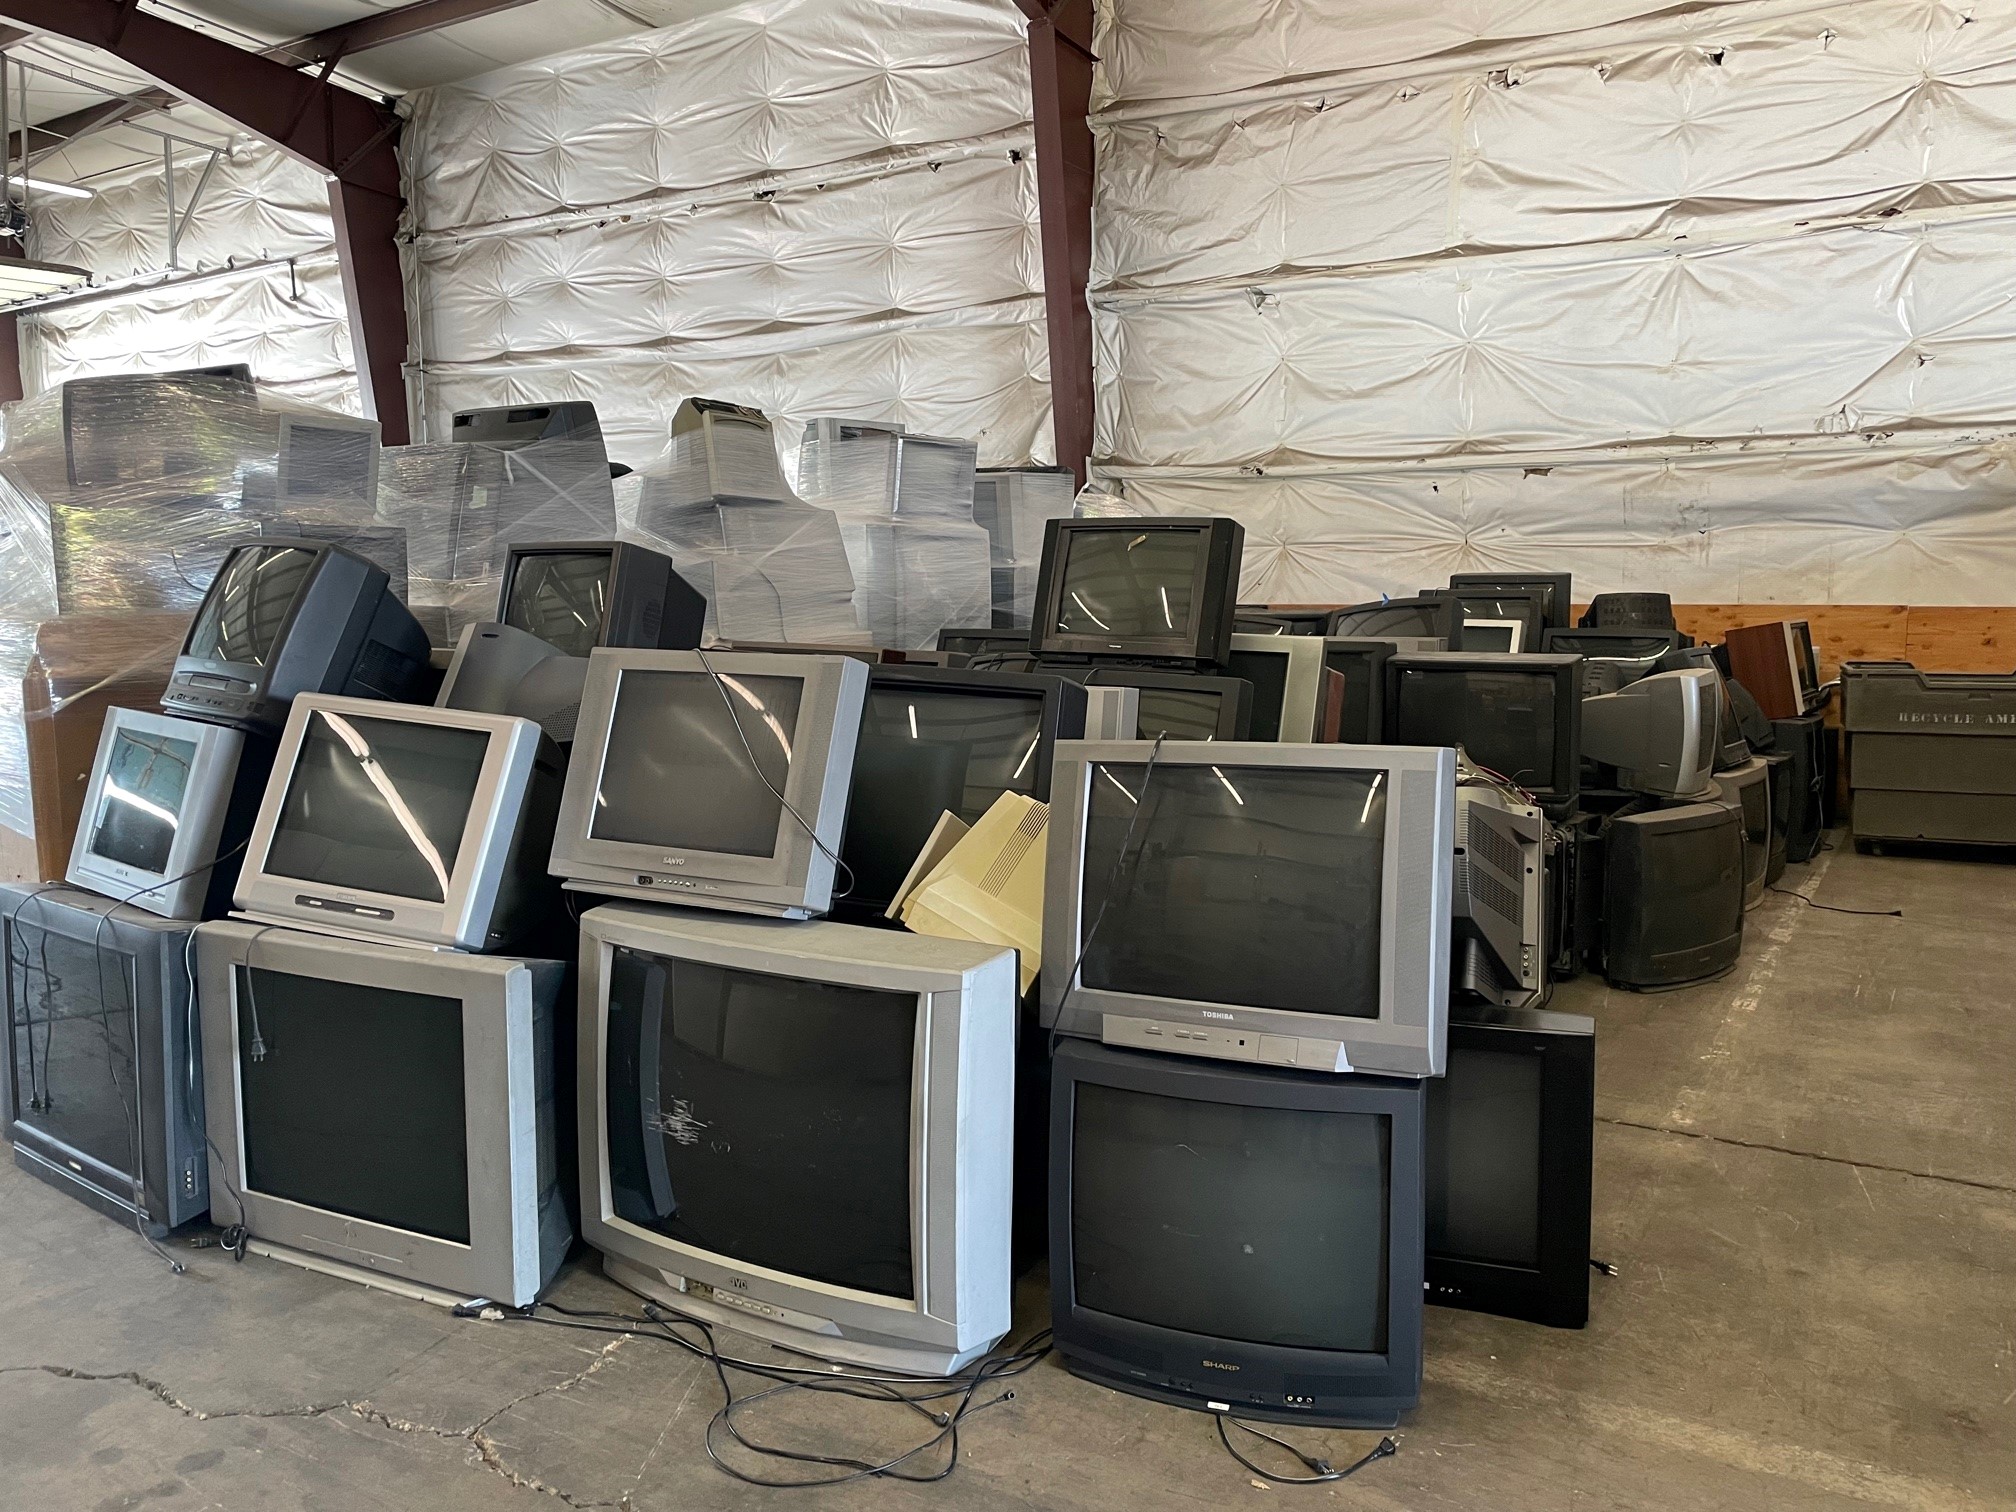 E-Waste tour on September 7, 2021. <span class="cc-gallery-credit">[Mae Rohrbach]</span>